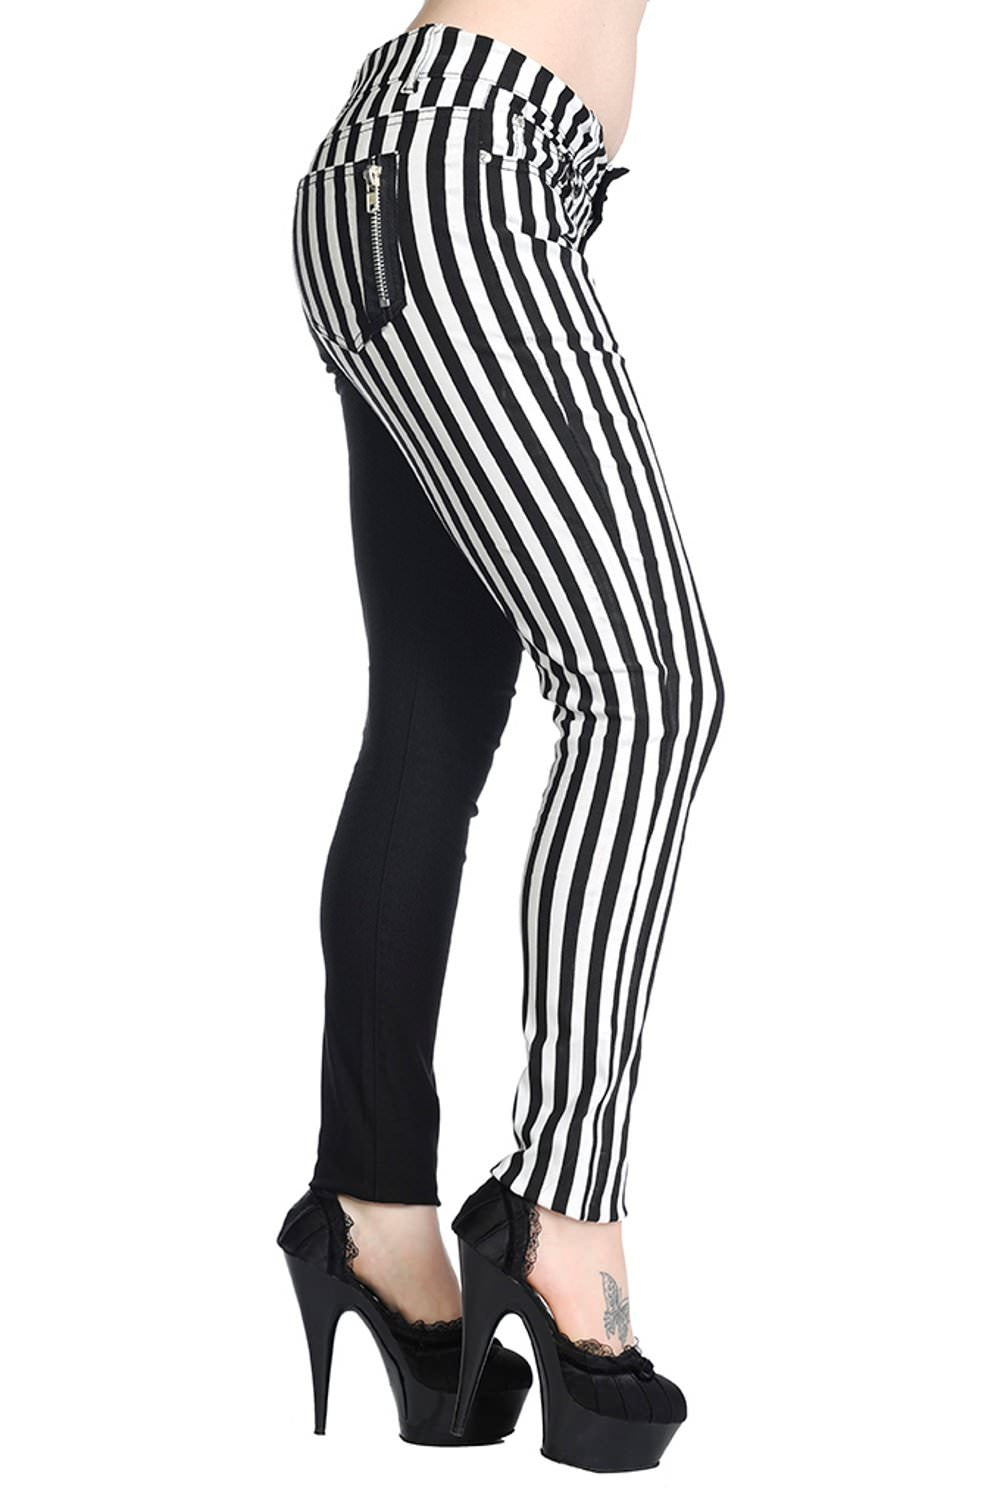 Half Black and Half Striped Skinny Jeans by Banned – Banned